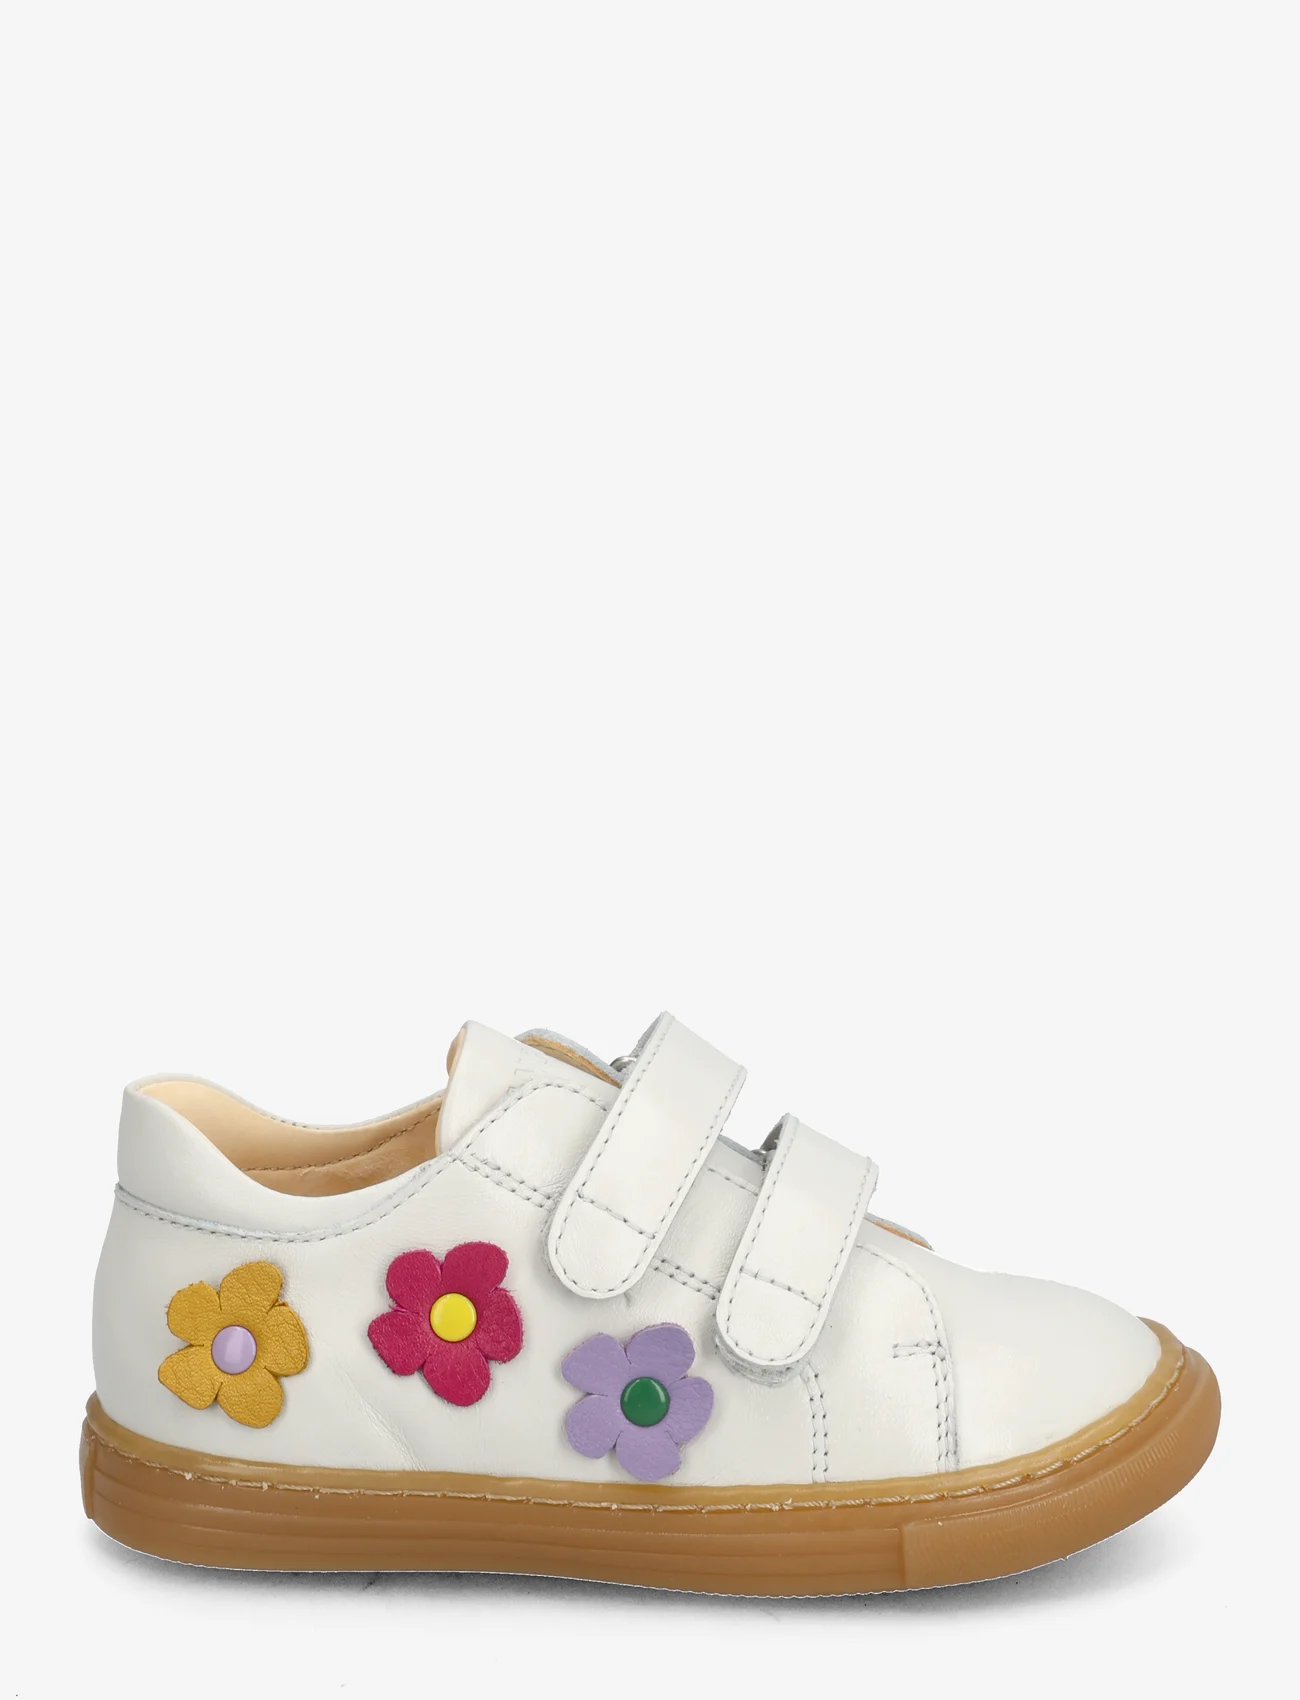 ANGULUS - Shoes - flat - with velcro - gode sommertilbud - 1493/a001 off white/flowers - 1